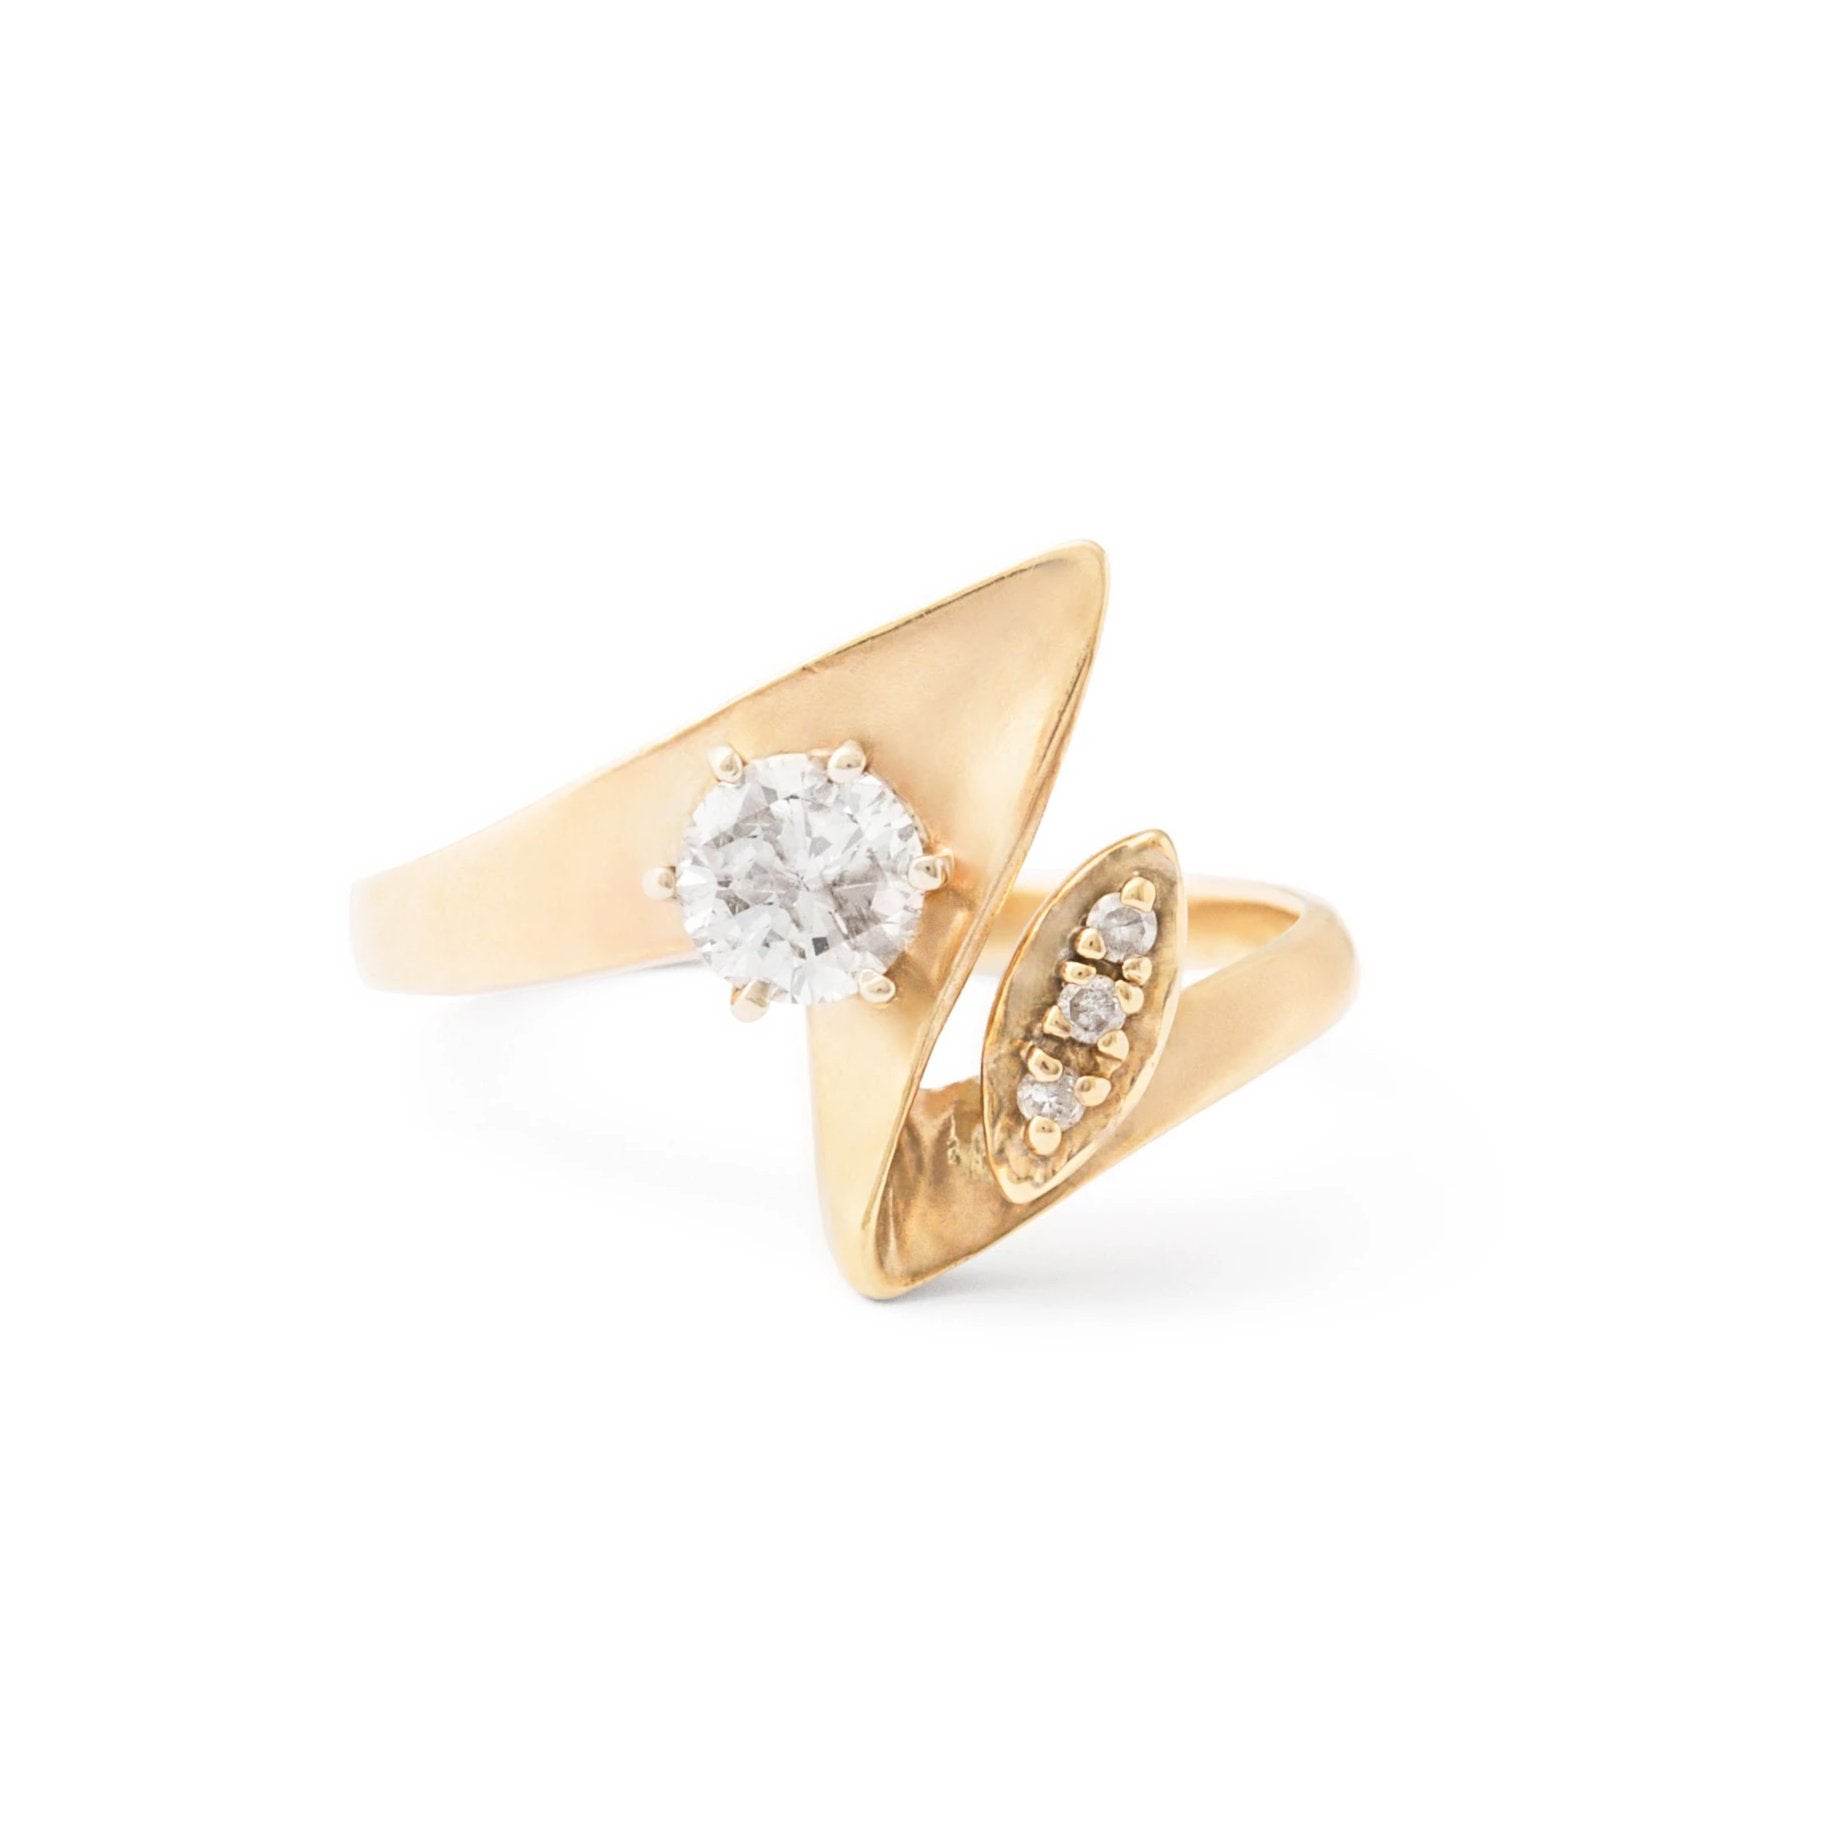 Abstract "Zigzag" Diamond and 14k Gold Ring